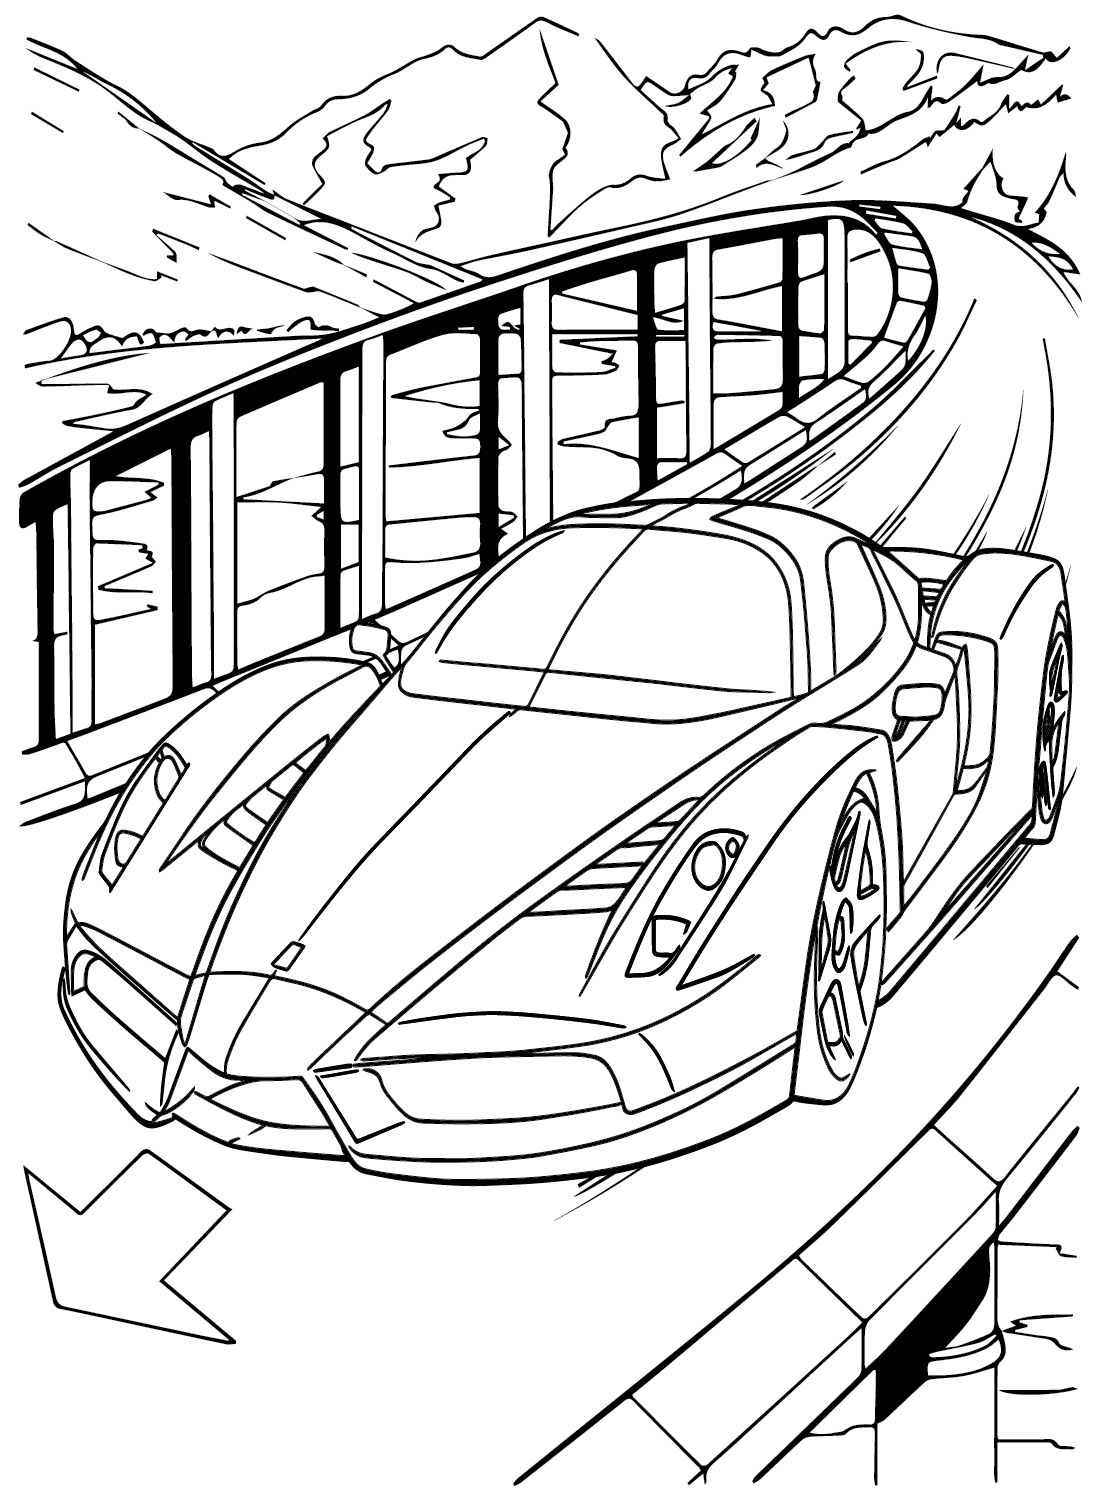 Coloring Page Ferrari Enzo - Free Printable Coloring Pages